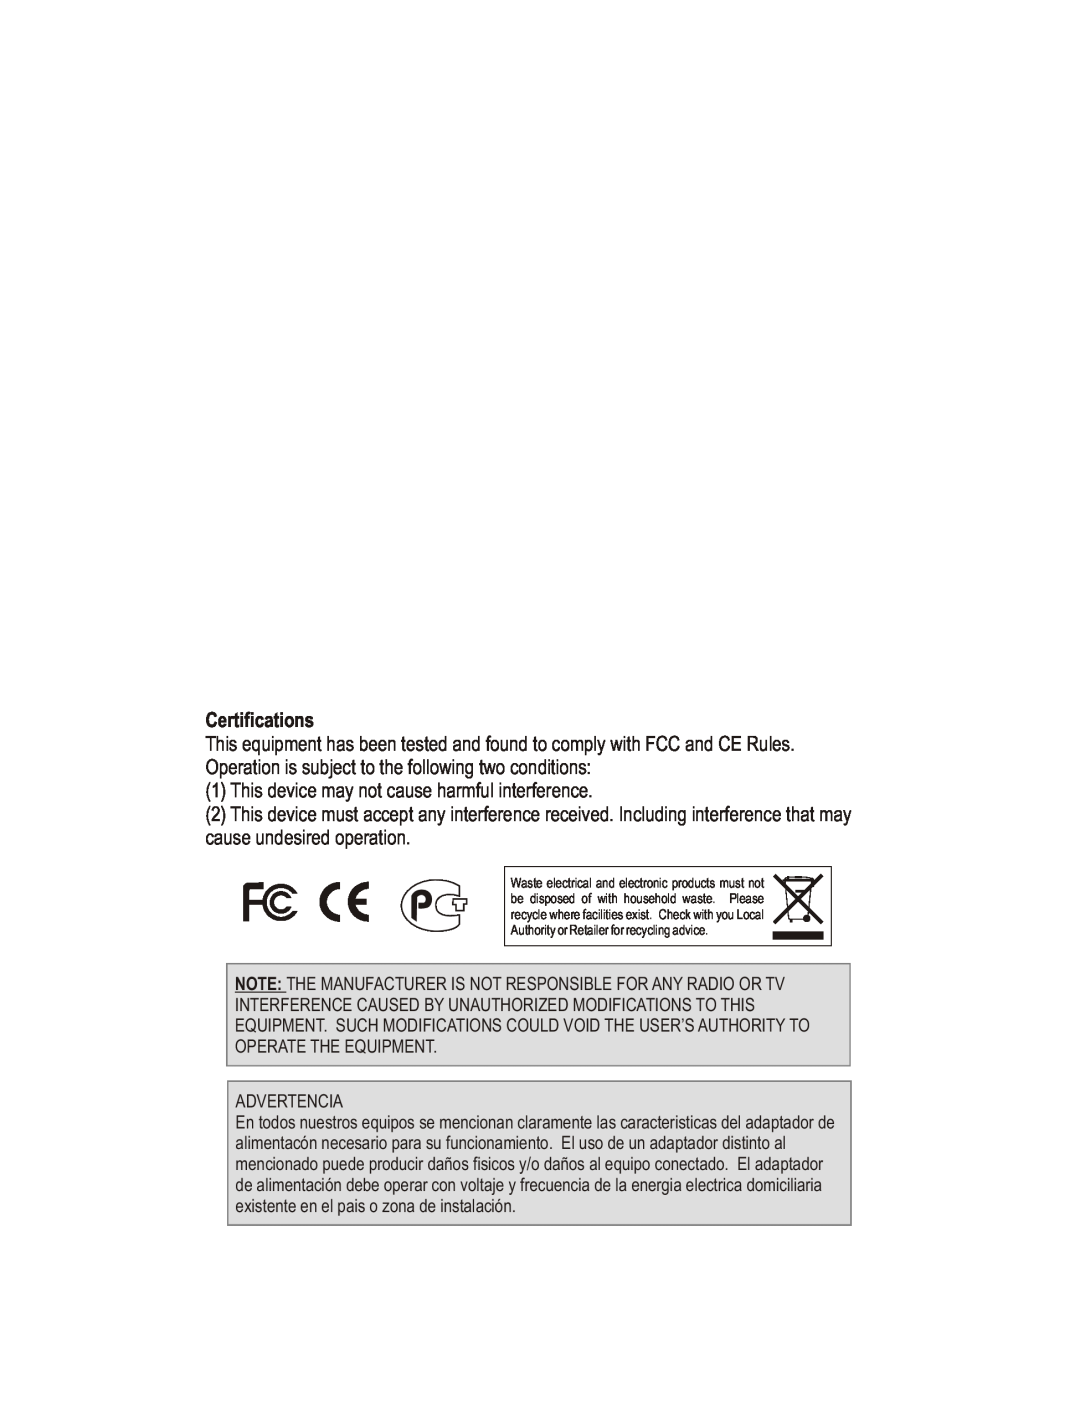 TRENDnet TK-803R, TK-1603R manual This device may not cause harmful interference 